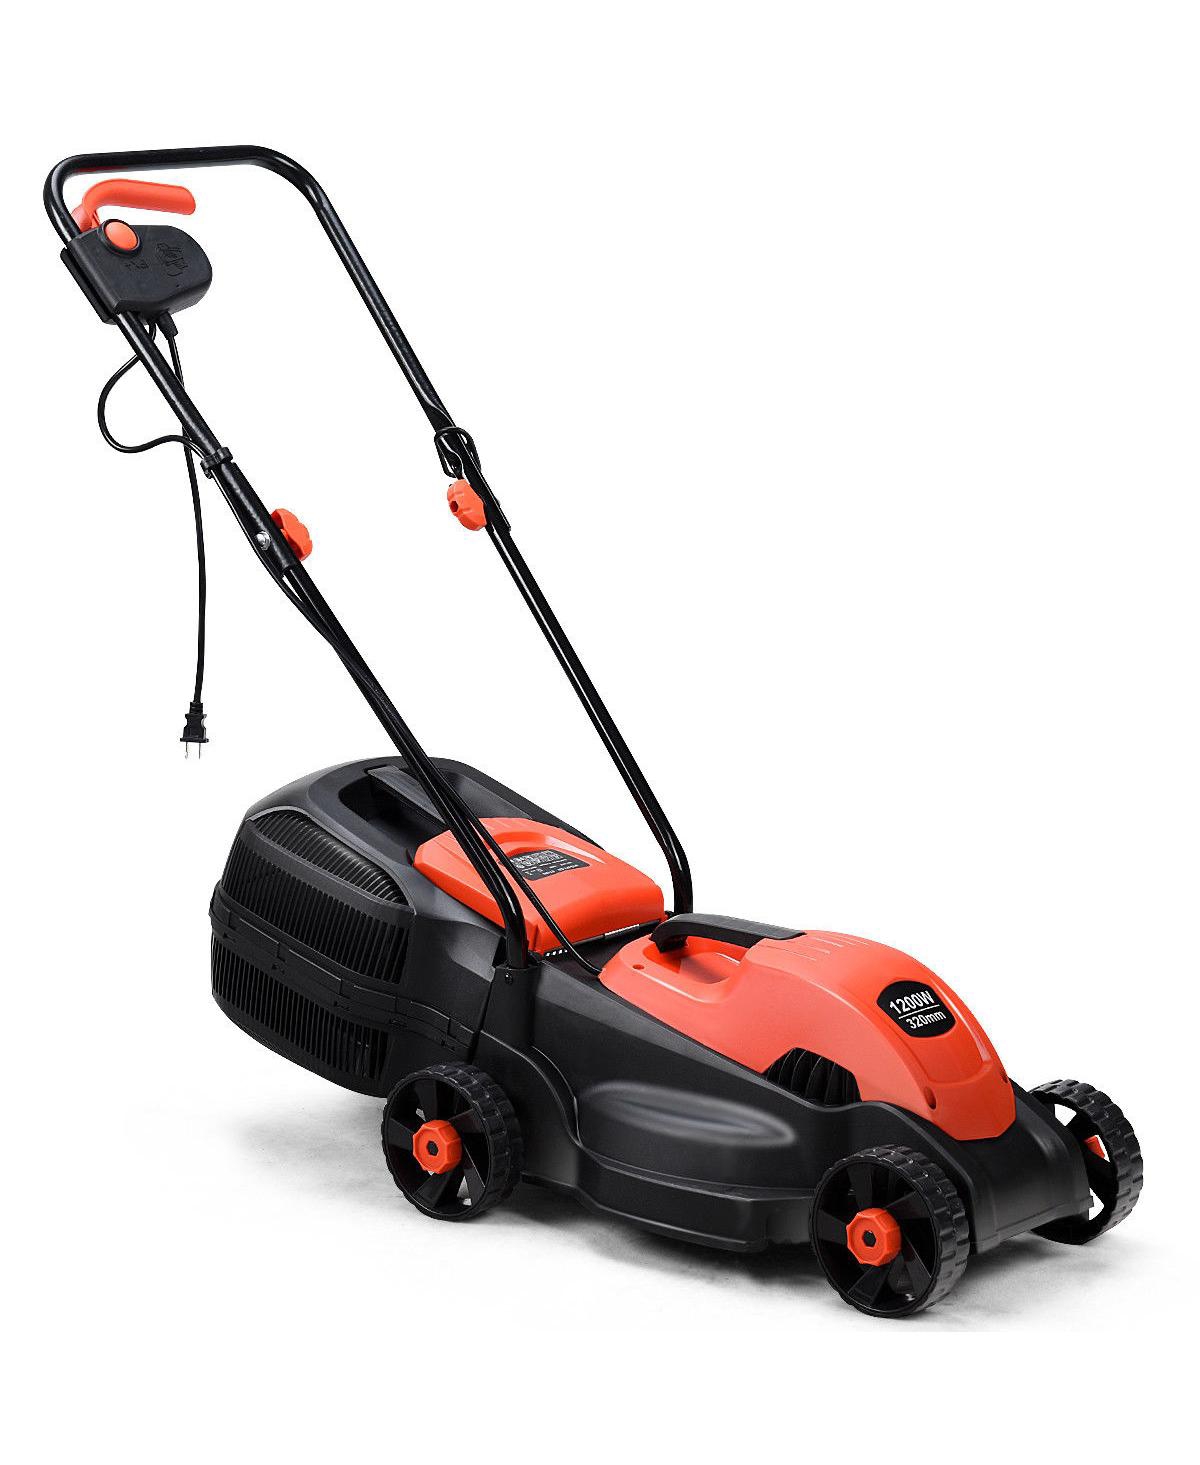 12 Amp 14-Inch Electric Push Lawn Corded Mower With Grass Bag - Red